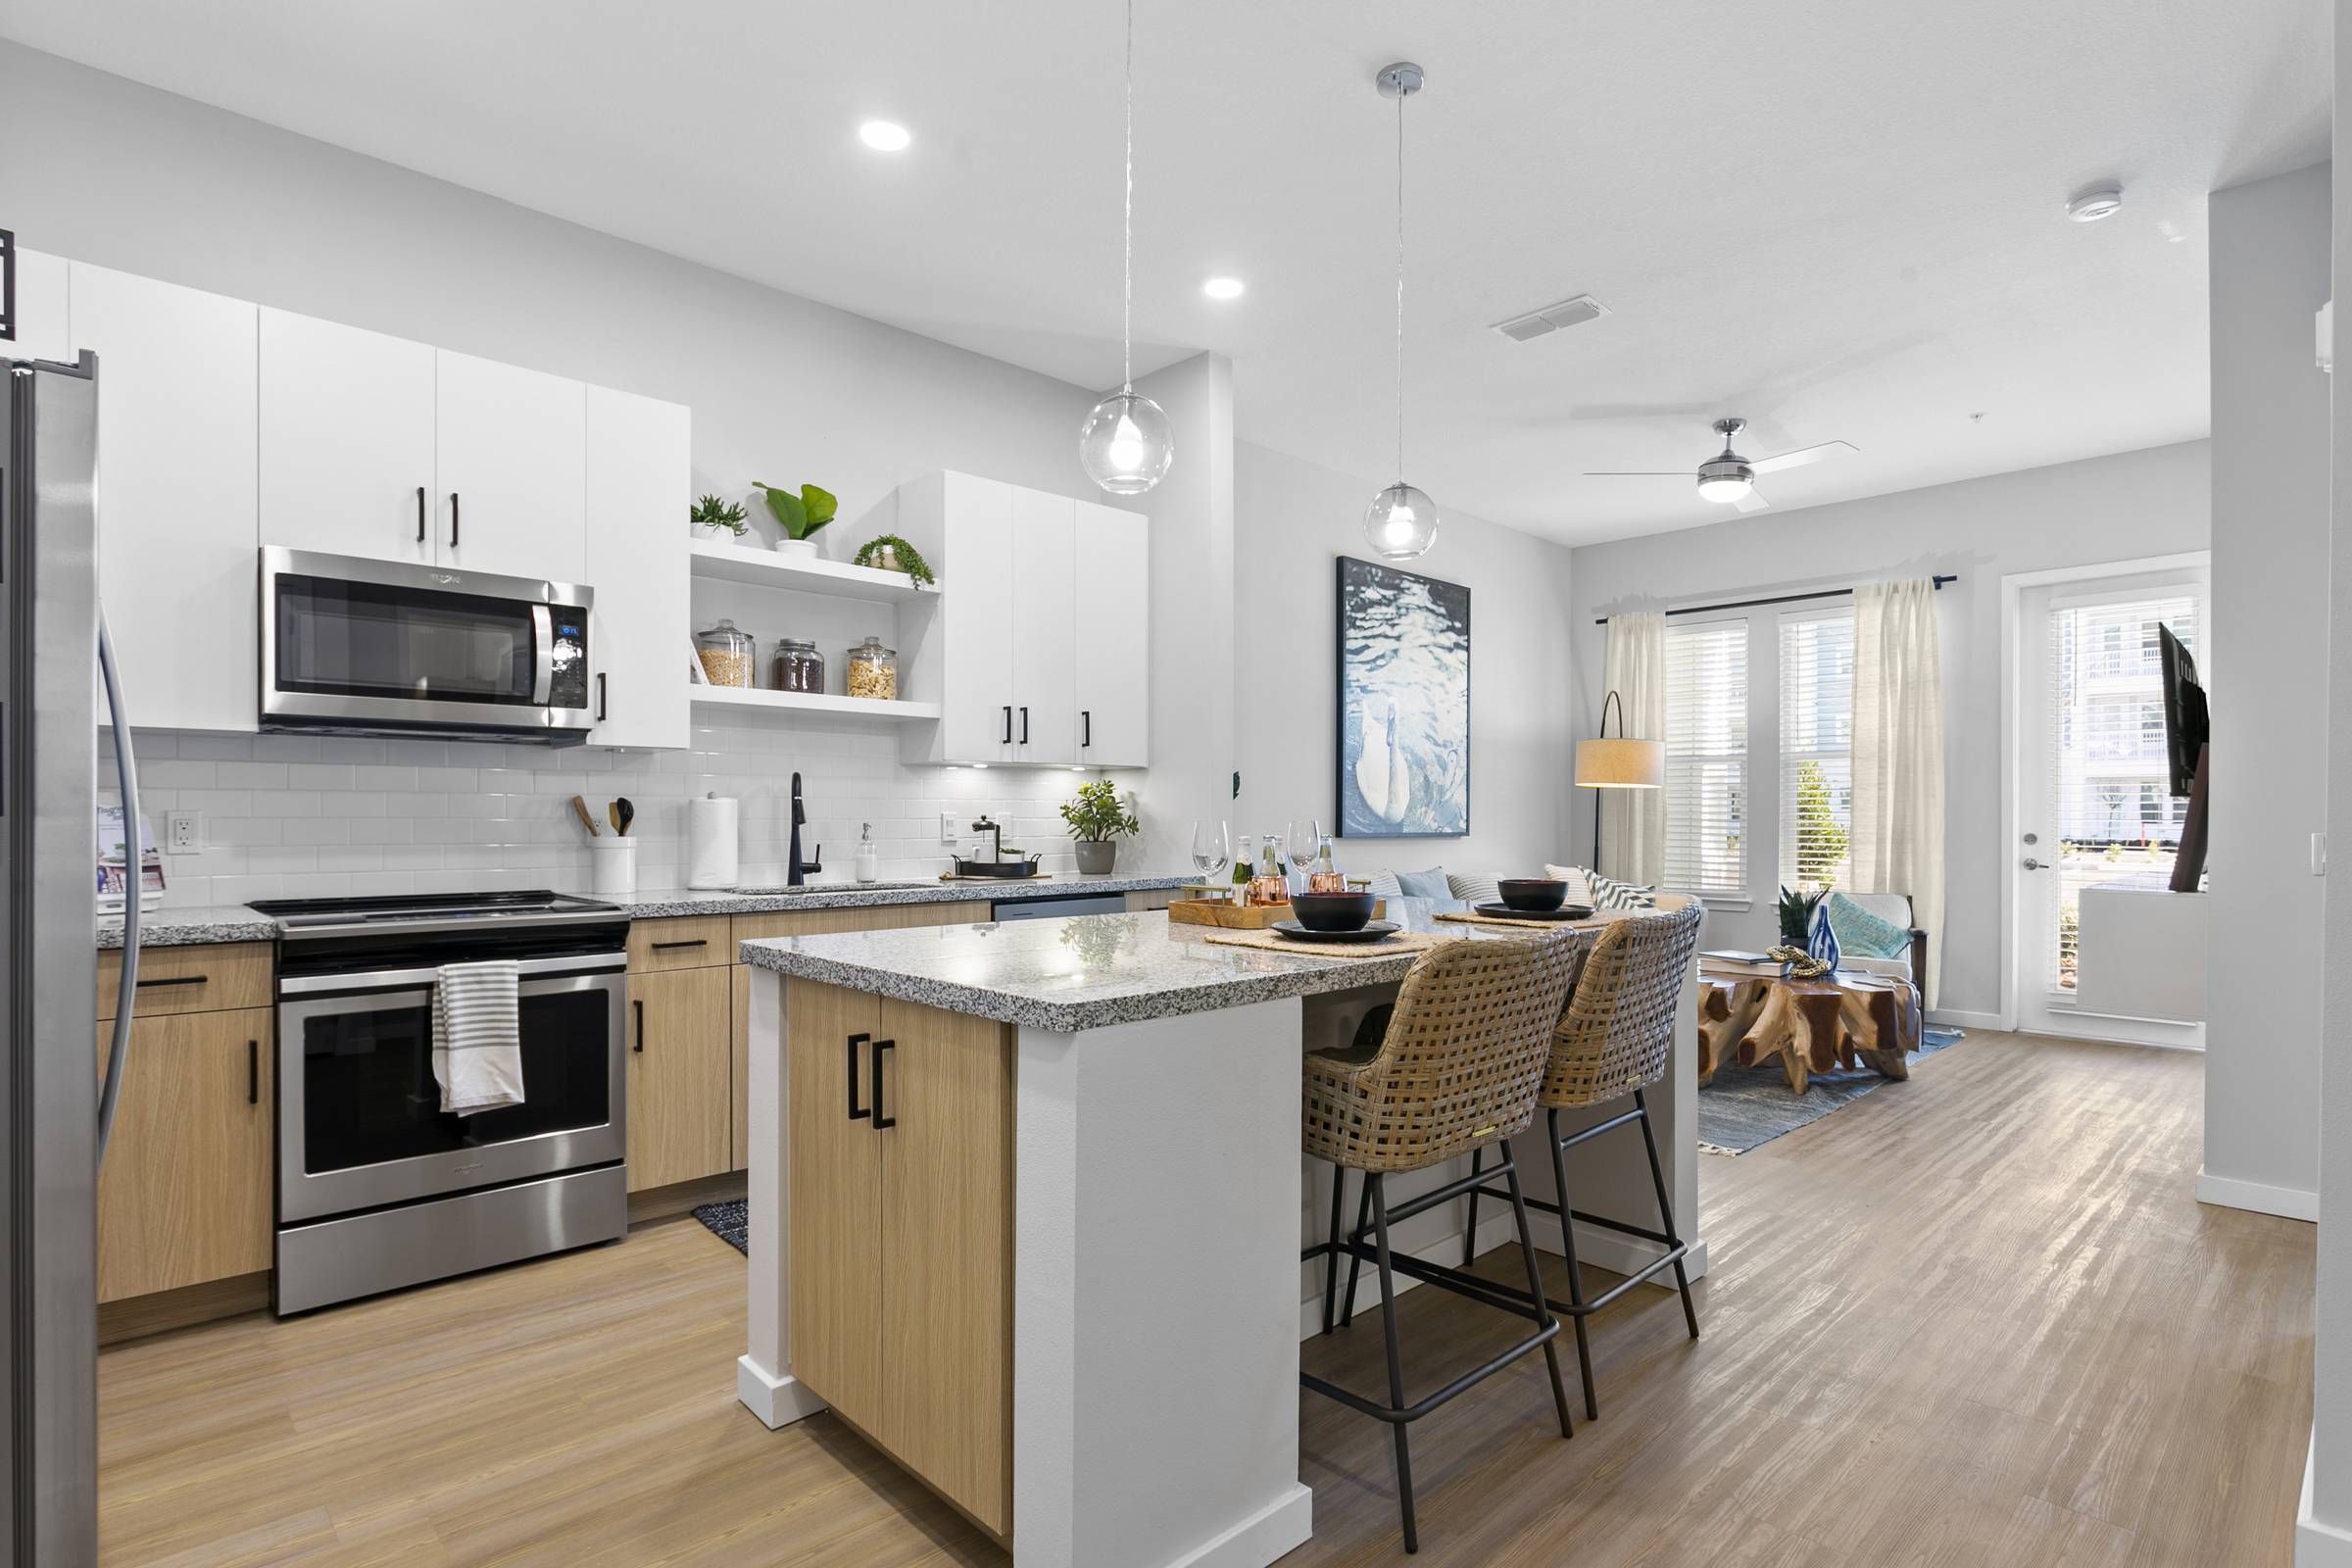 A sleek, modern kitchen inside Alta Belleair with white cabinetry and stainless steel appliances, overlooking a cozy living area with abundant daylight.